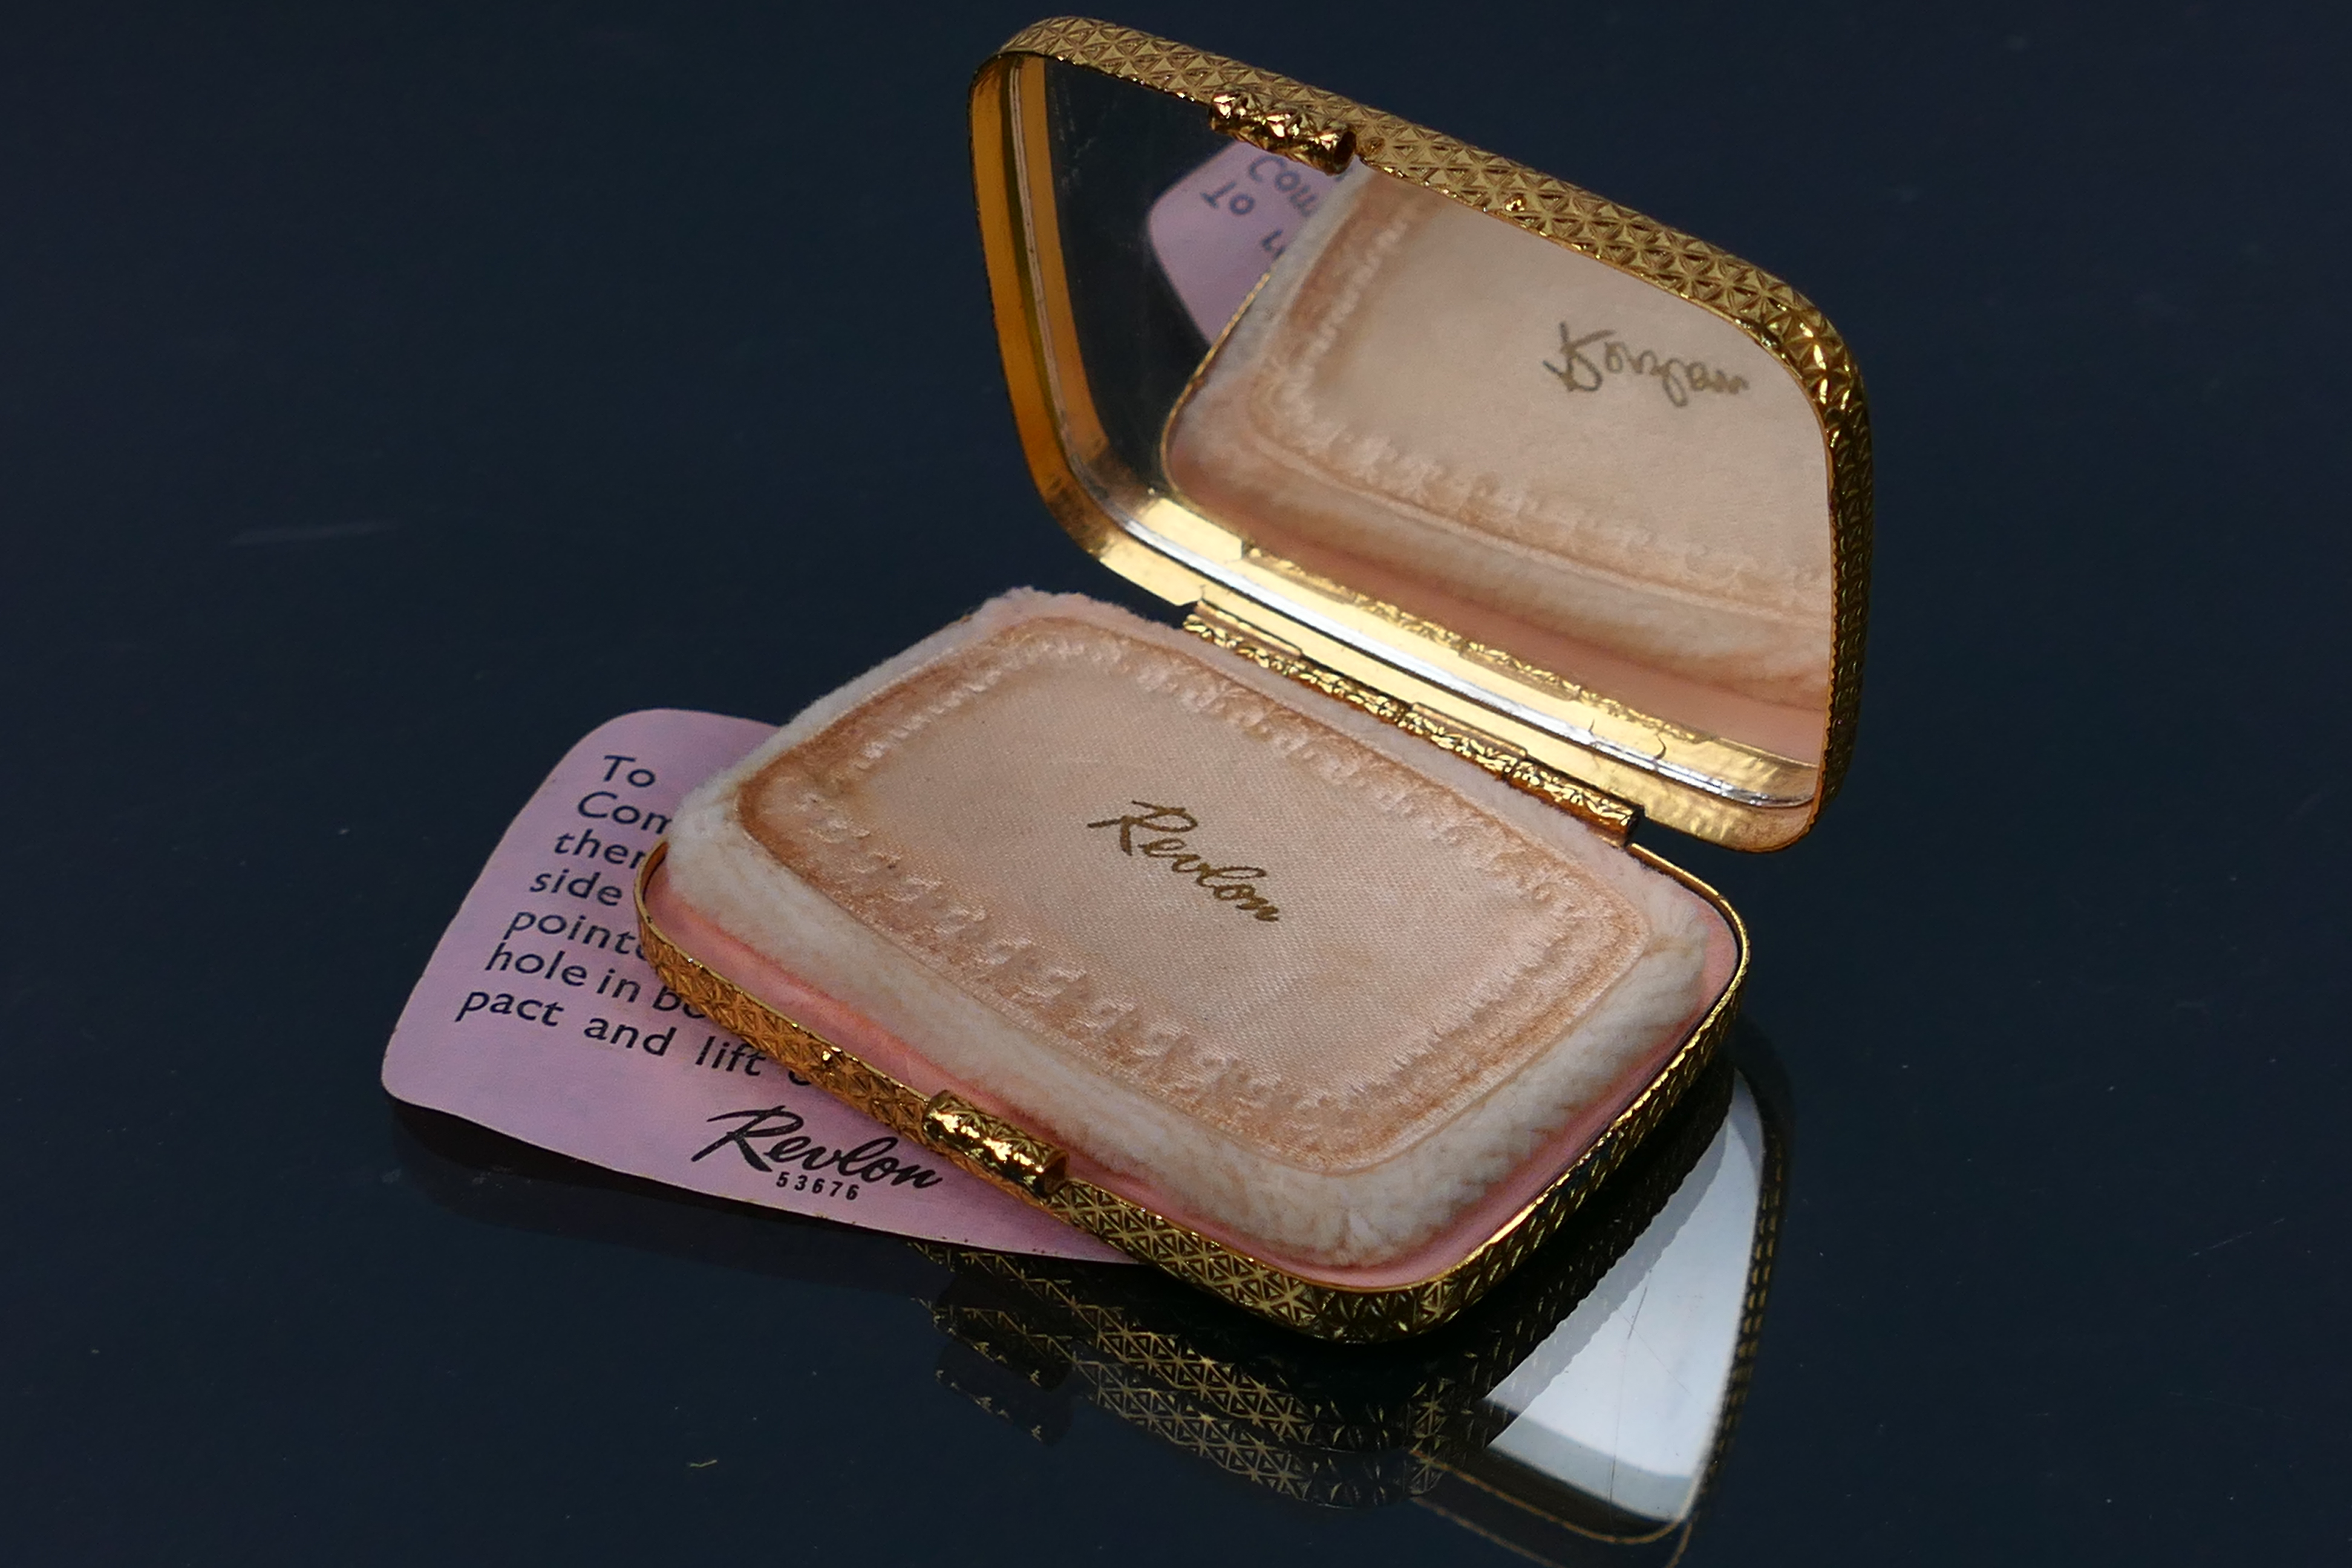 Estee Lauder - Revlon - A vintage Estee Lauder Honey Glow compact with a mother of pearl style - Image 8 of 9